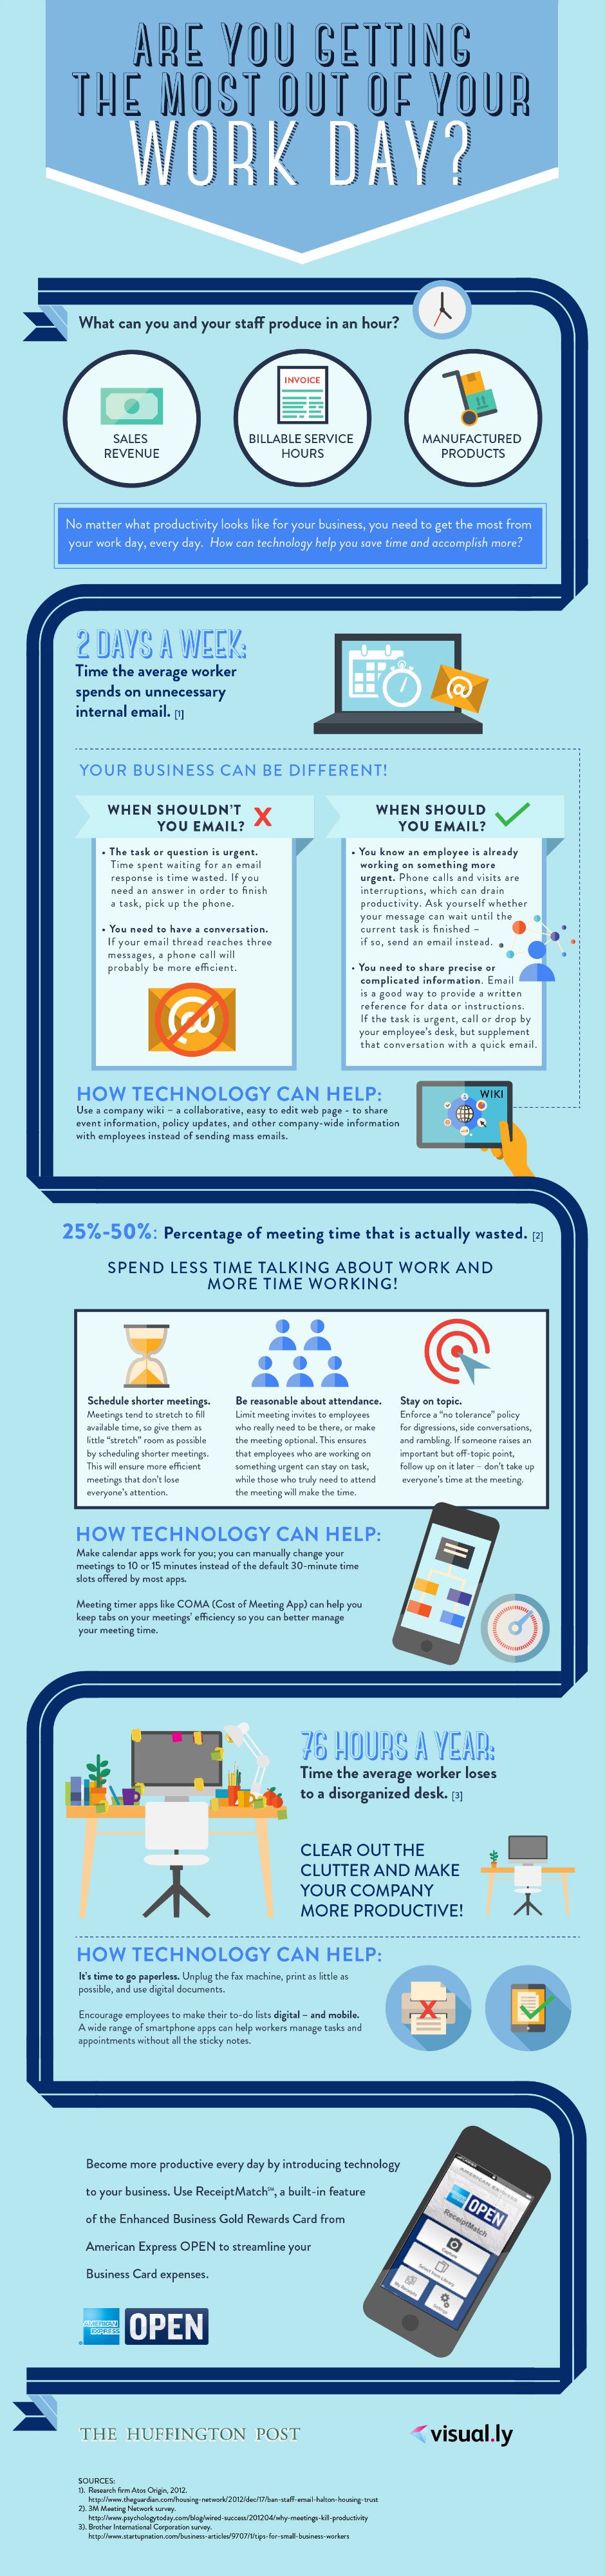 Are You Getting the Most Out of Your Work Day? [Infographic]